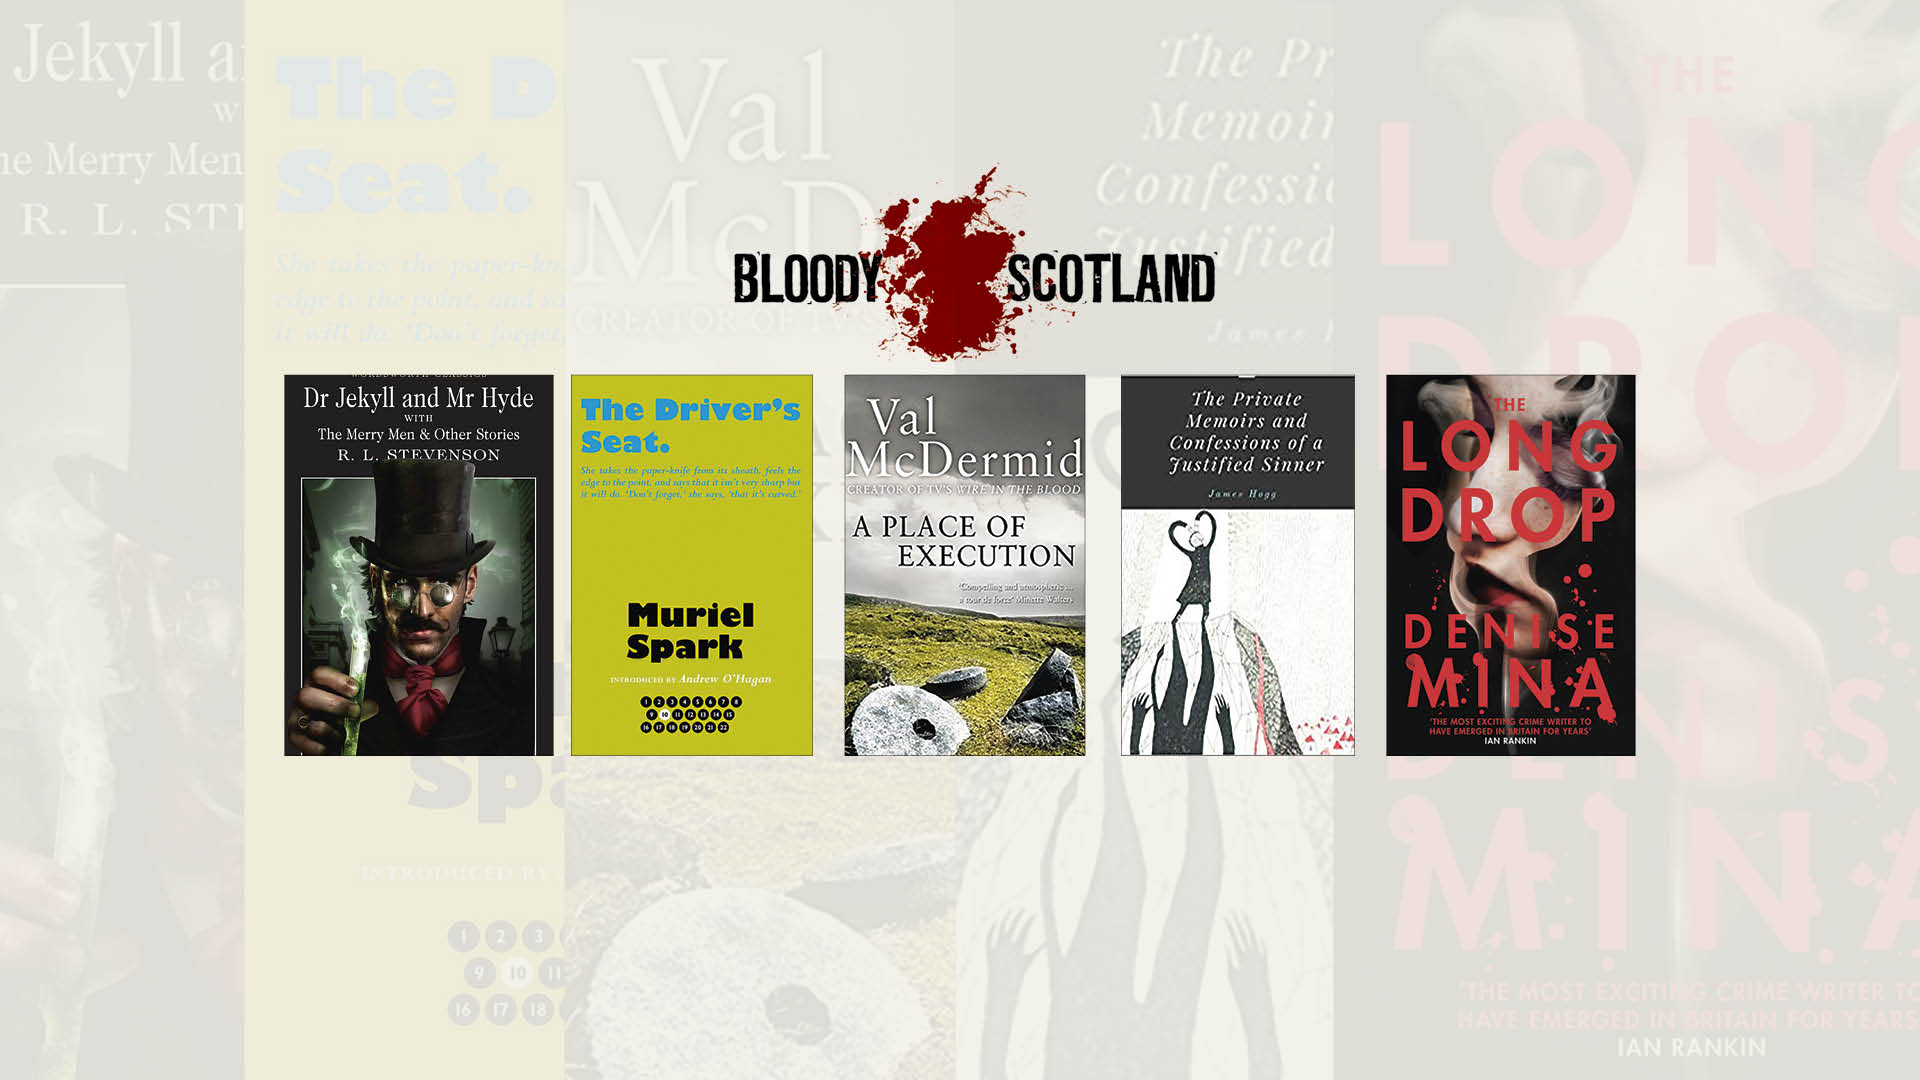 Top 5 books about crime as chosen by Liam McIlvaney